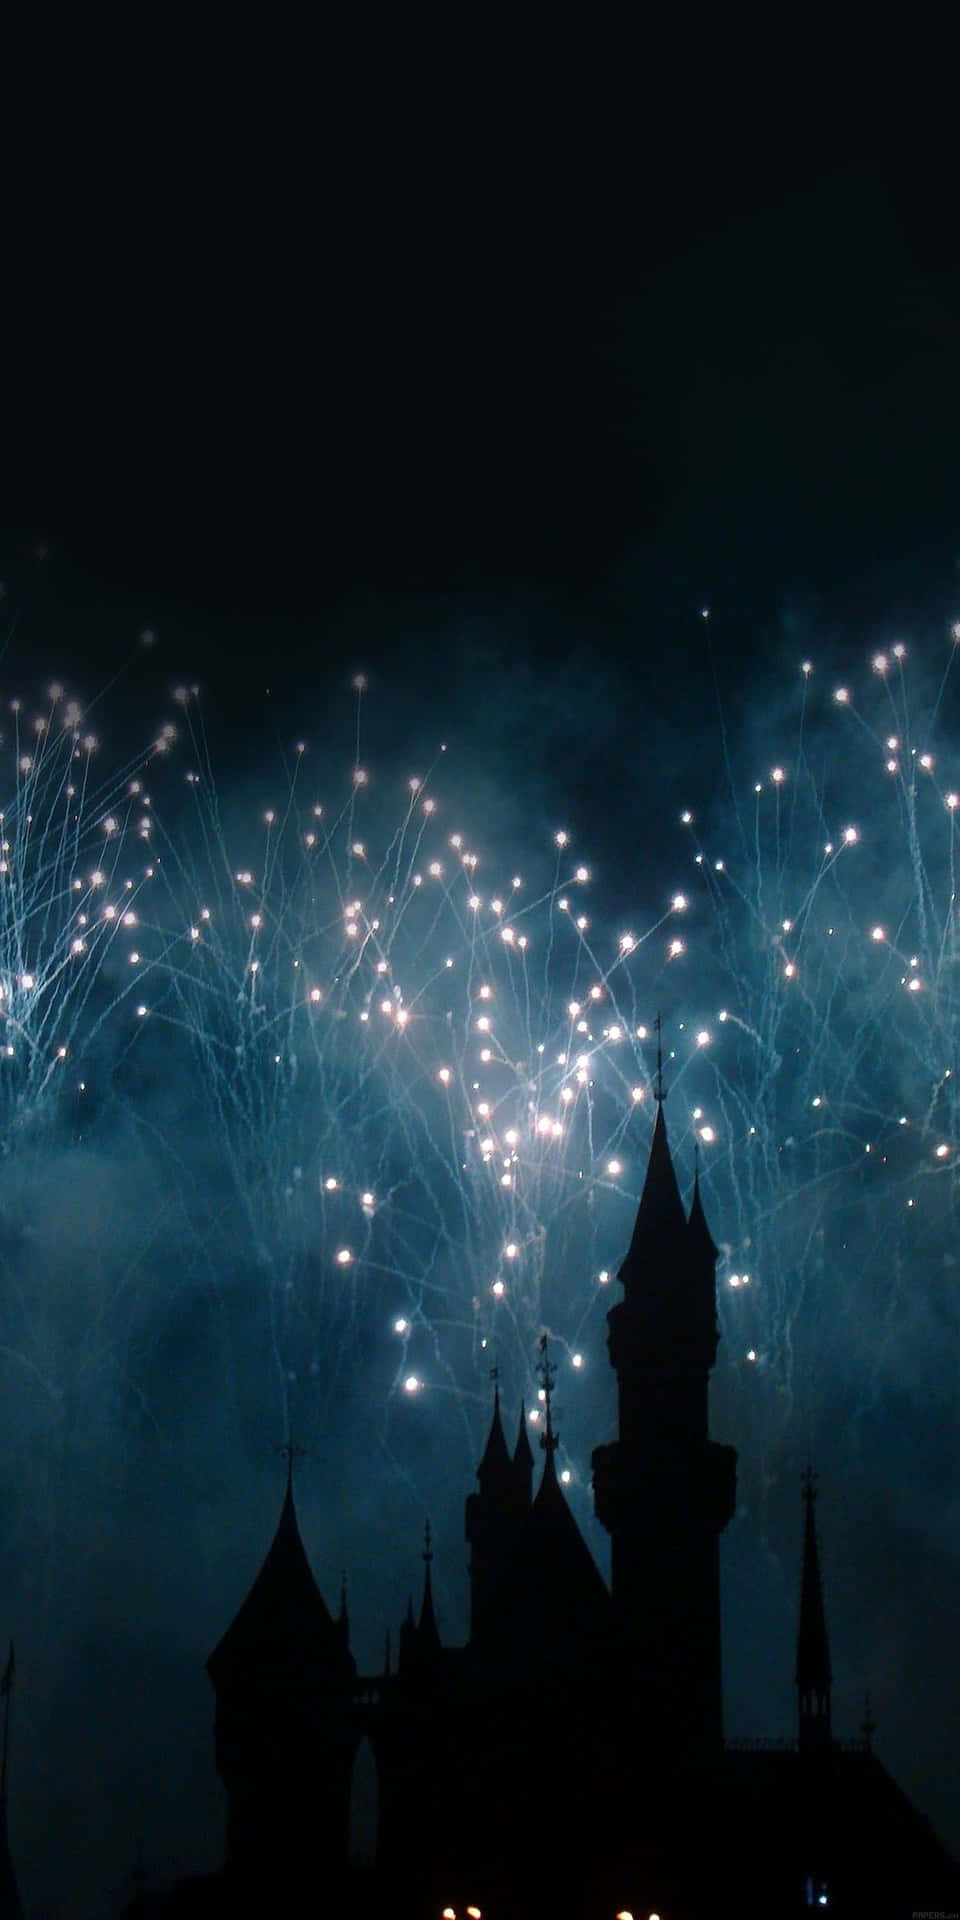 A Castle With Fireworks